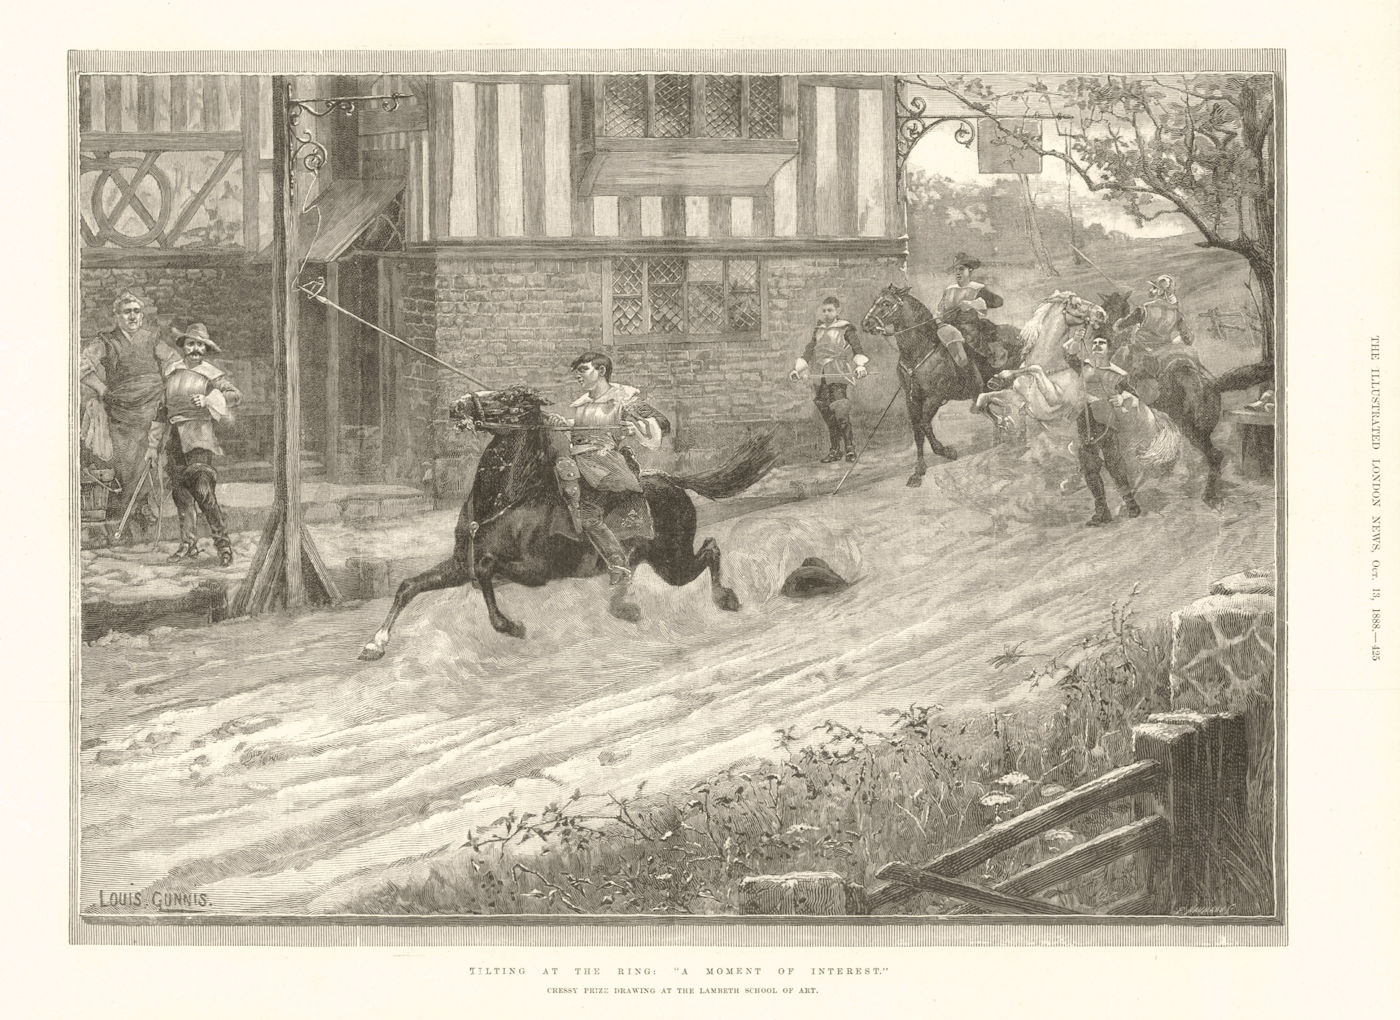 Tilting at the ring: "A moment of interest" Crecy Prize drawing. Horses 1888